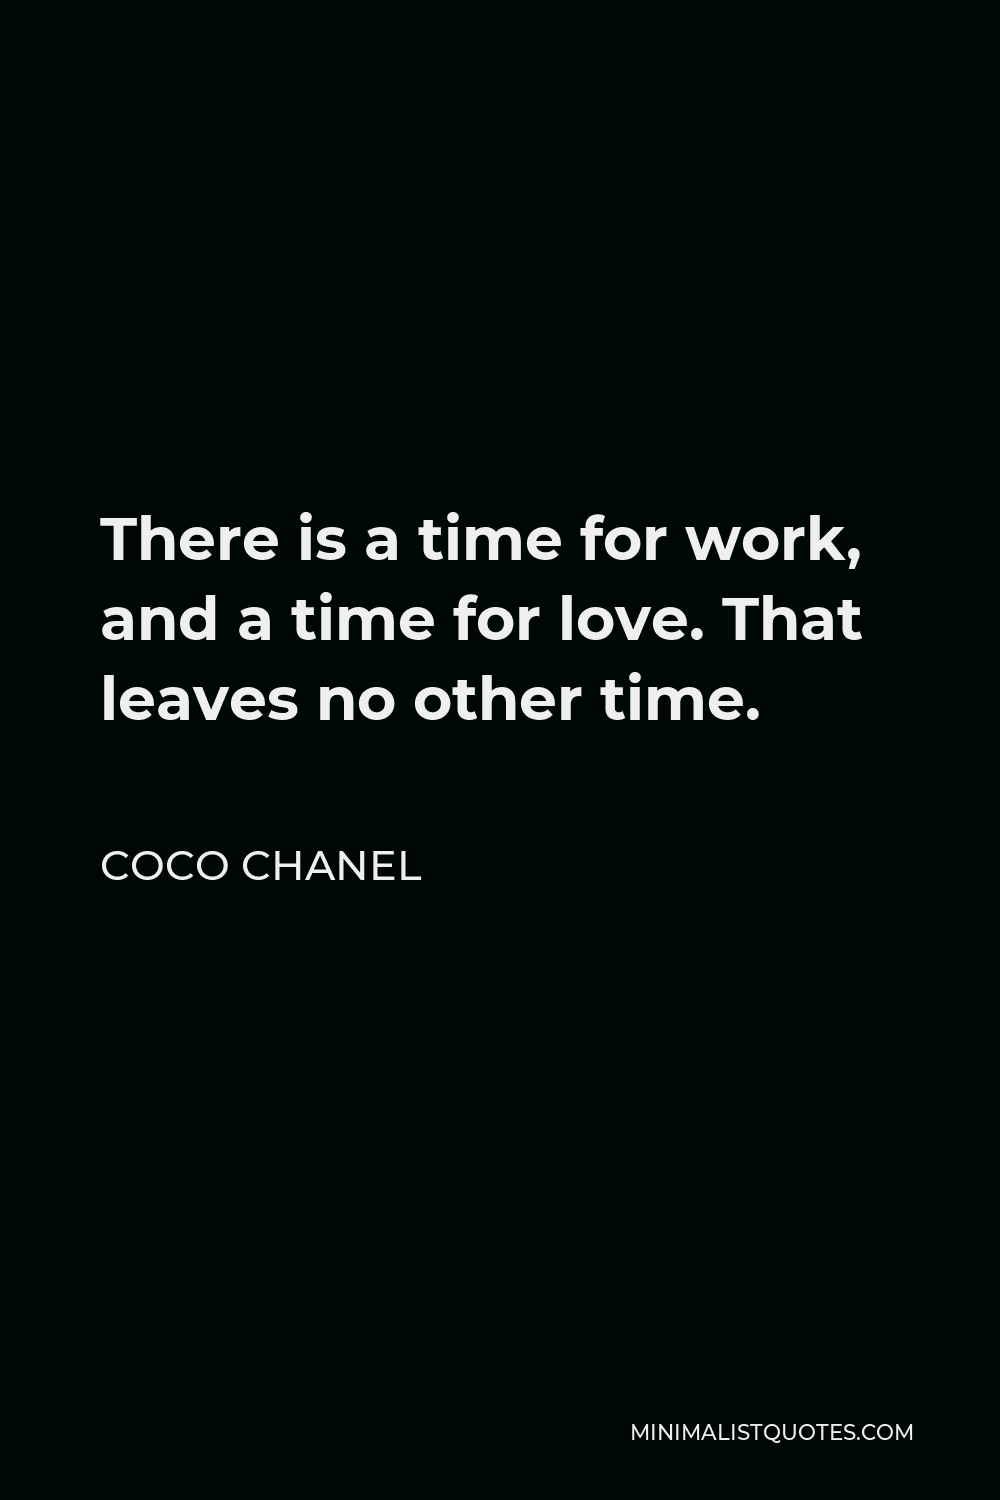 Chi tiết 63+ về coco chanel quotes about love 